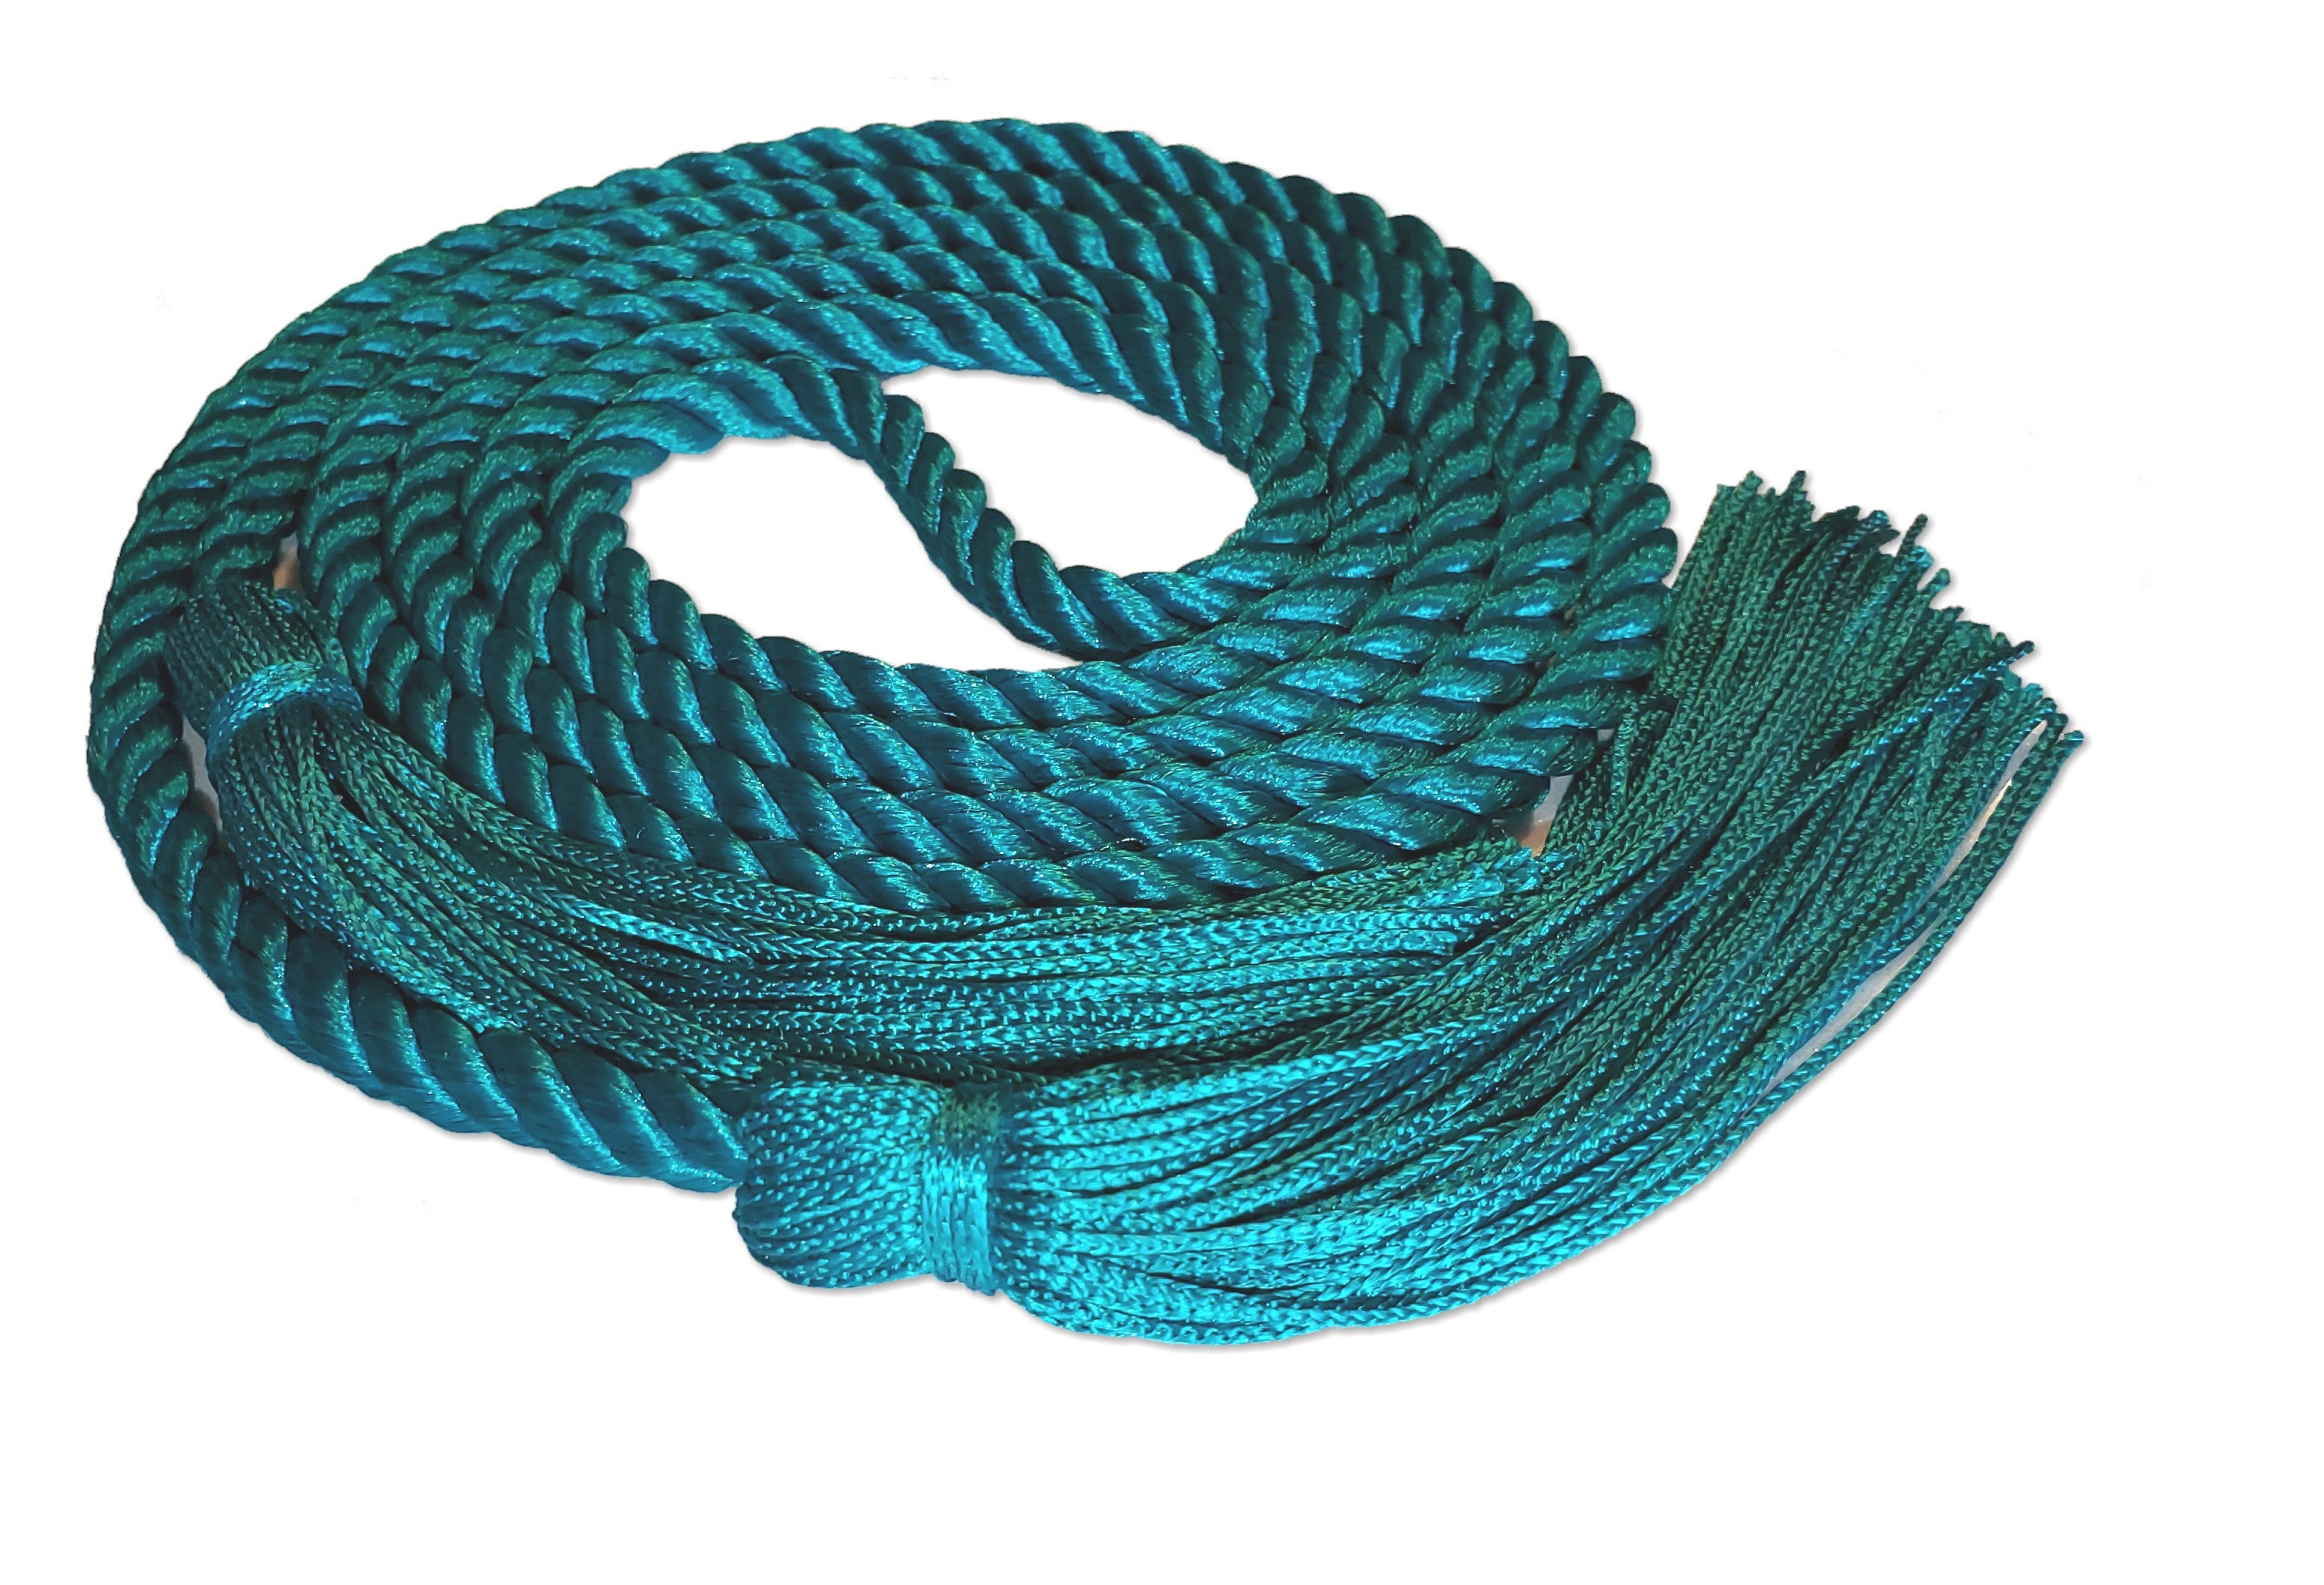 Teal Honor Cords, Senior Class Graduation Products